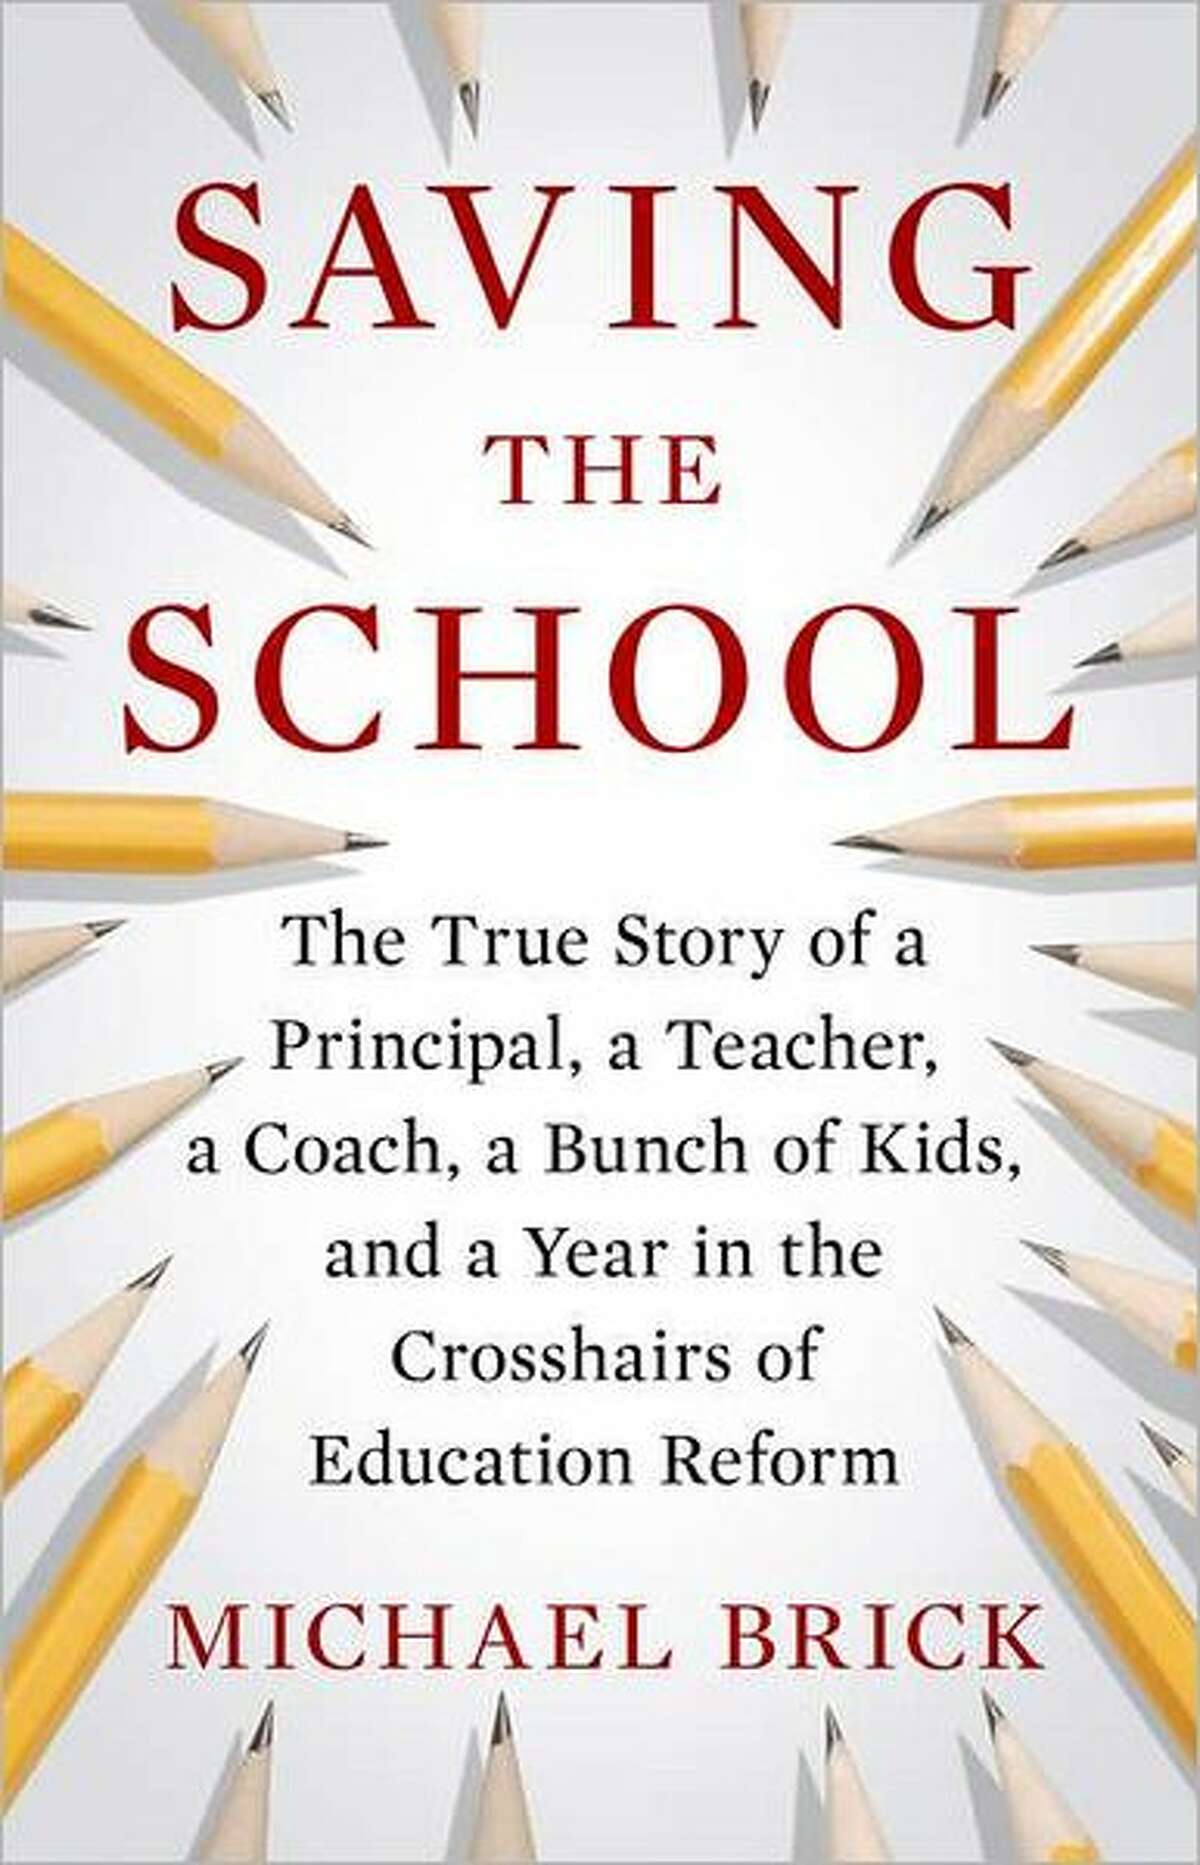 "Saving the School," by Michael Brick; $25.95 Hardcover: 288 pages Publisher: Penguin Press HC, The (August 16, 2012) Language: English ISBN-10: 159420344X ISBN-13: 978-1594203442